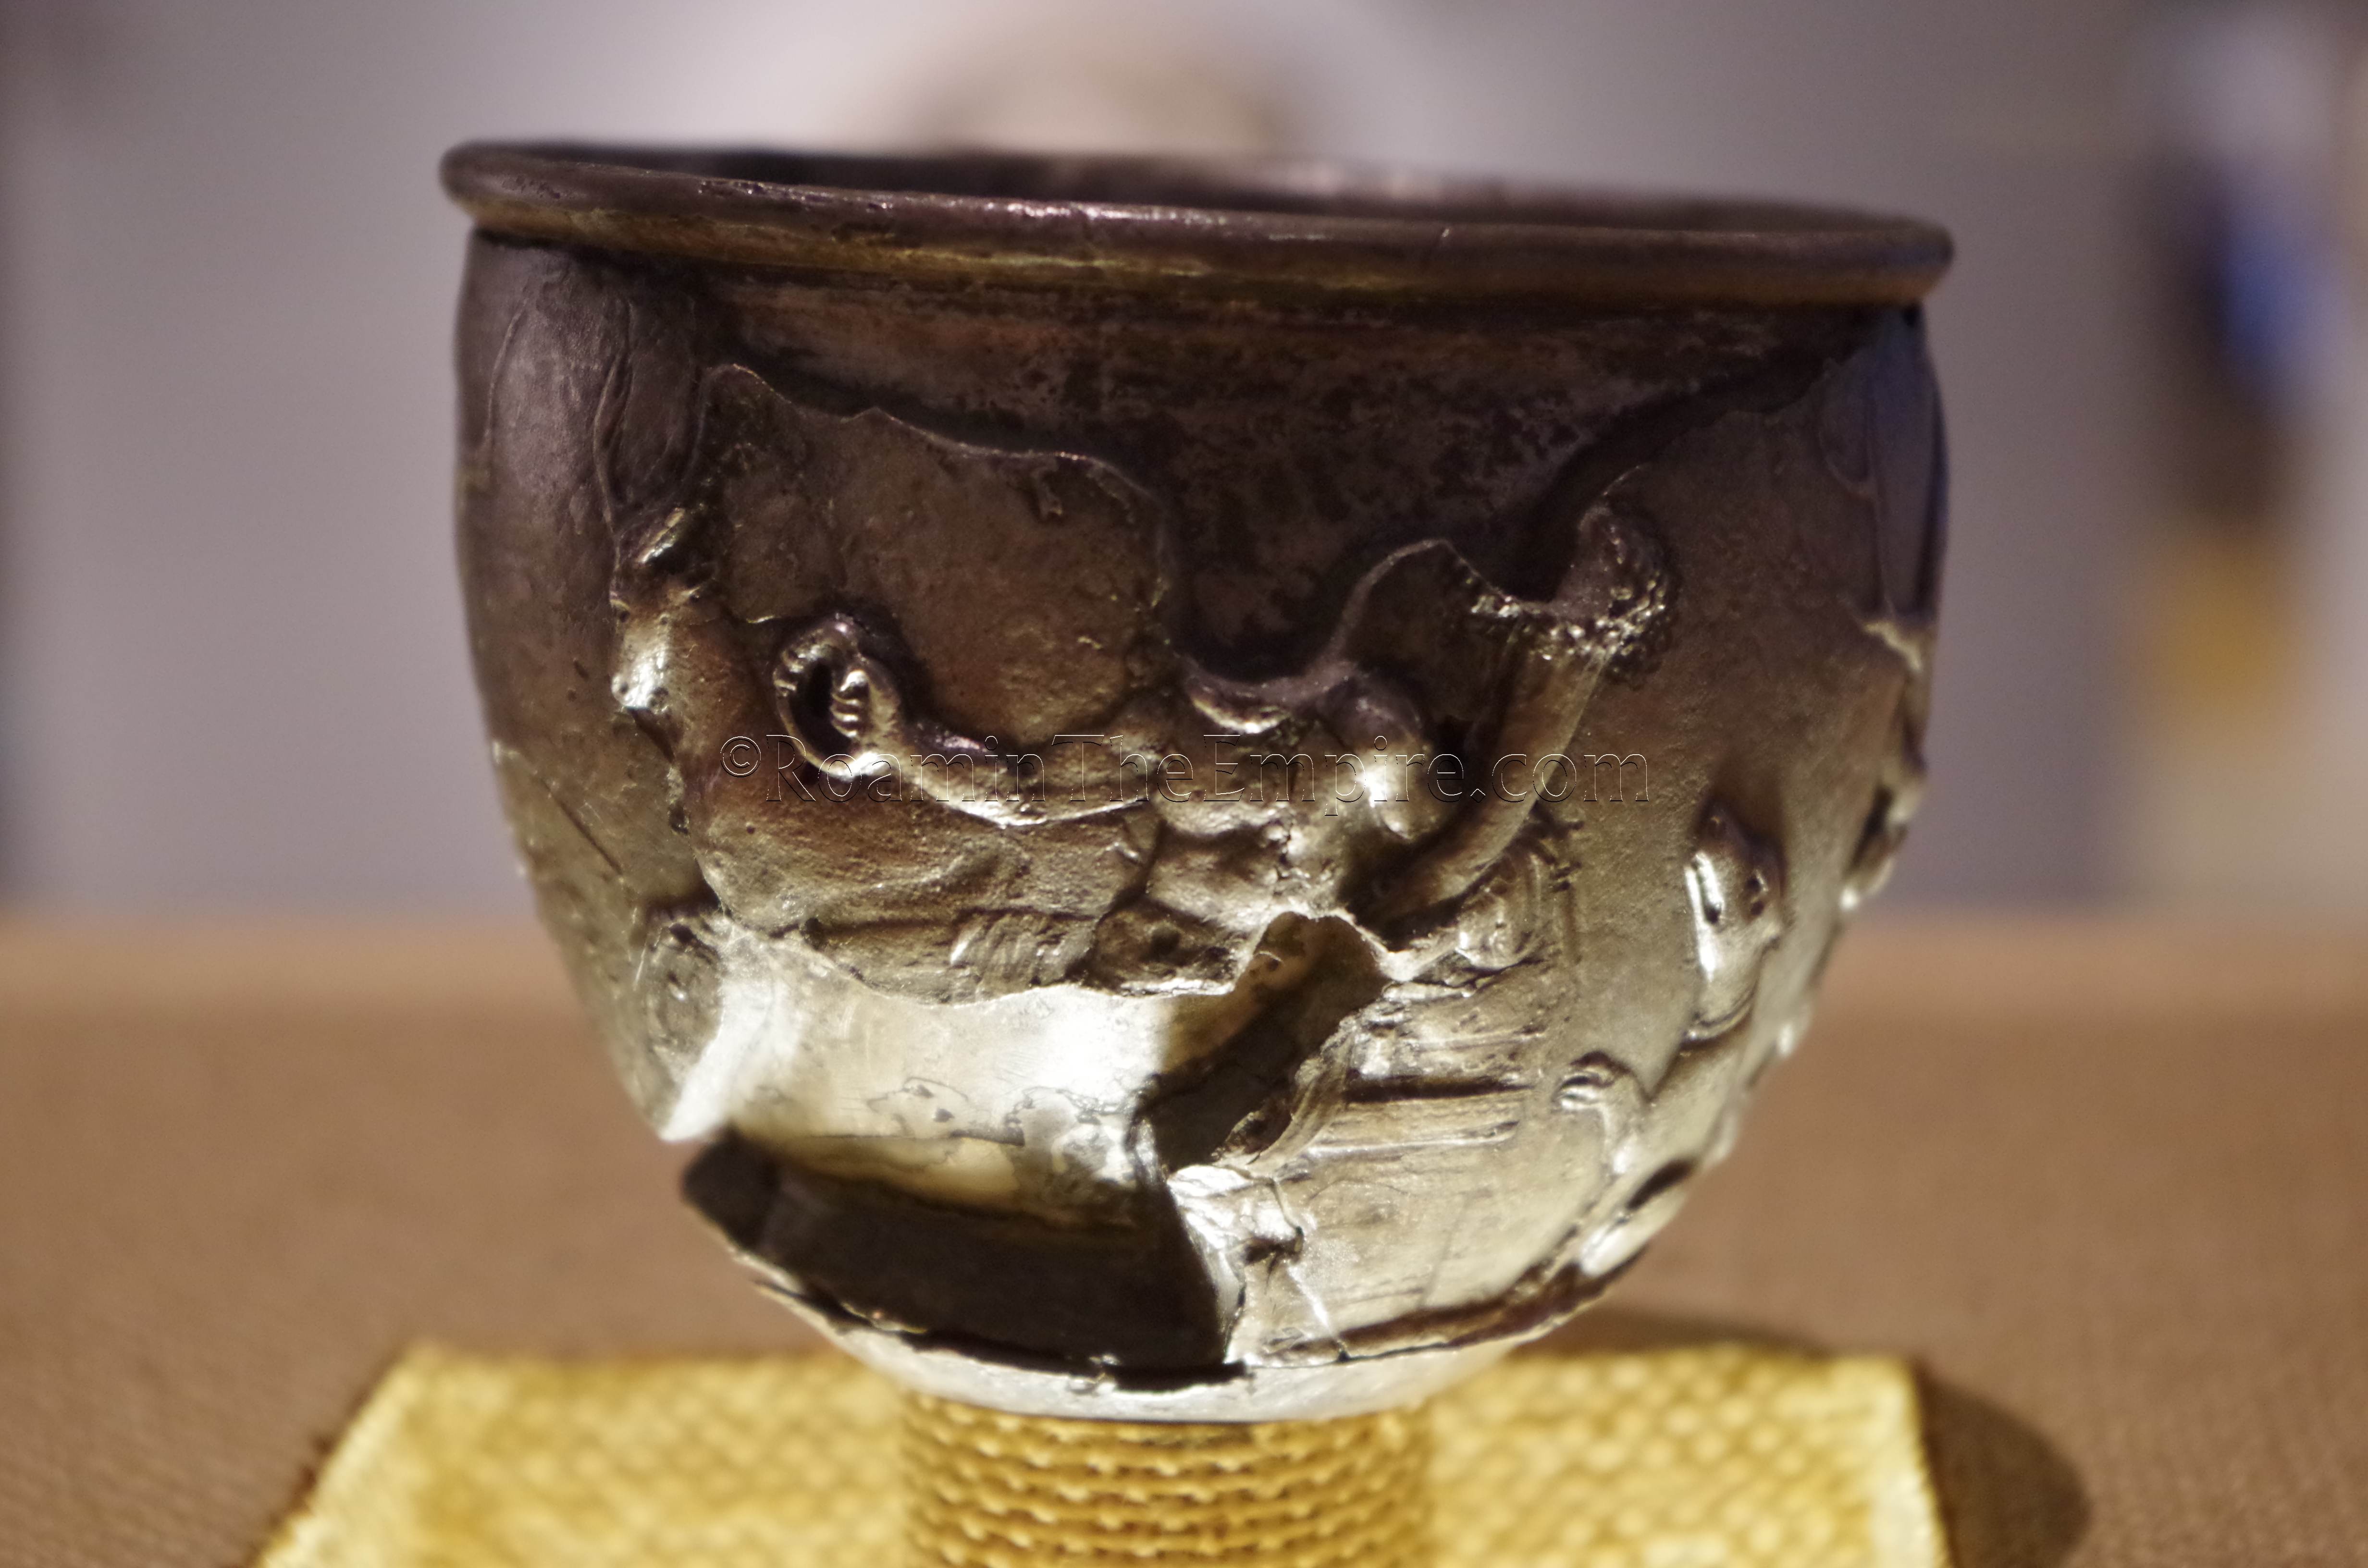 Silver goblet with depictions of Gallic gods; this face displaying Cernunnos. Produced in Lugdunum in the second half of the 1st century CE. Lyon.